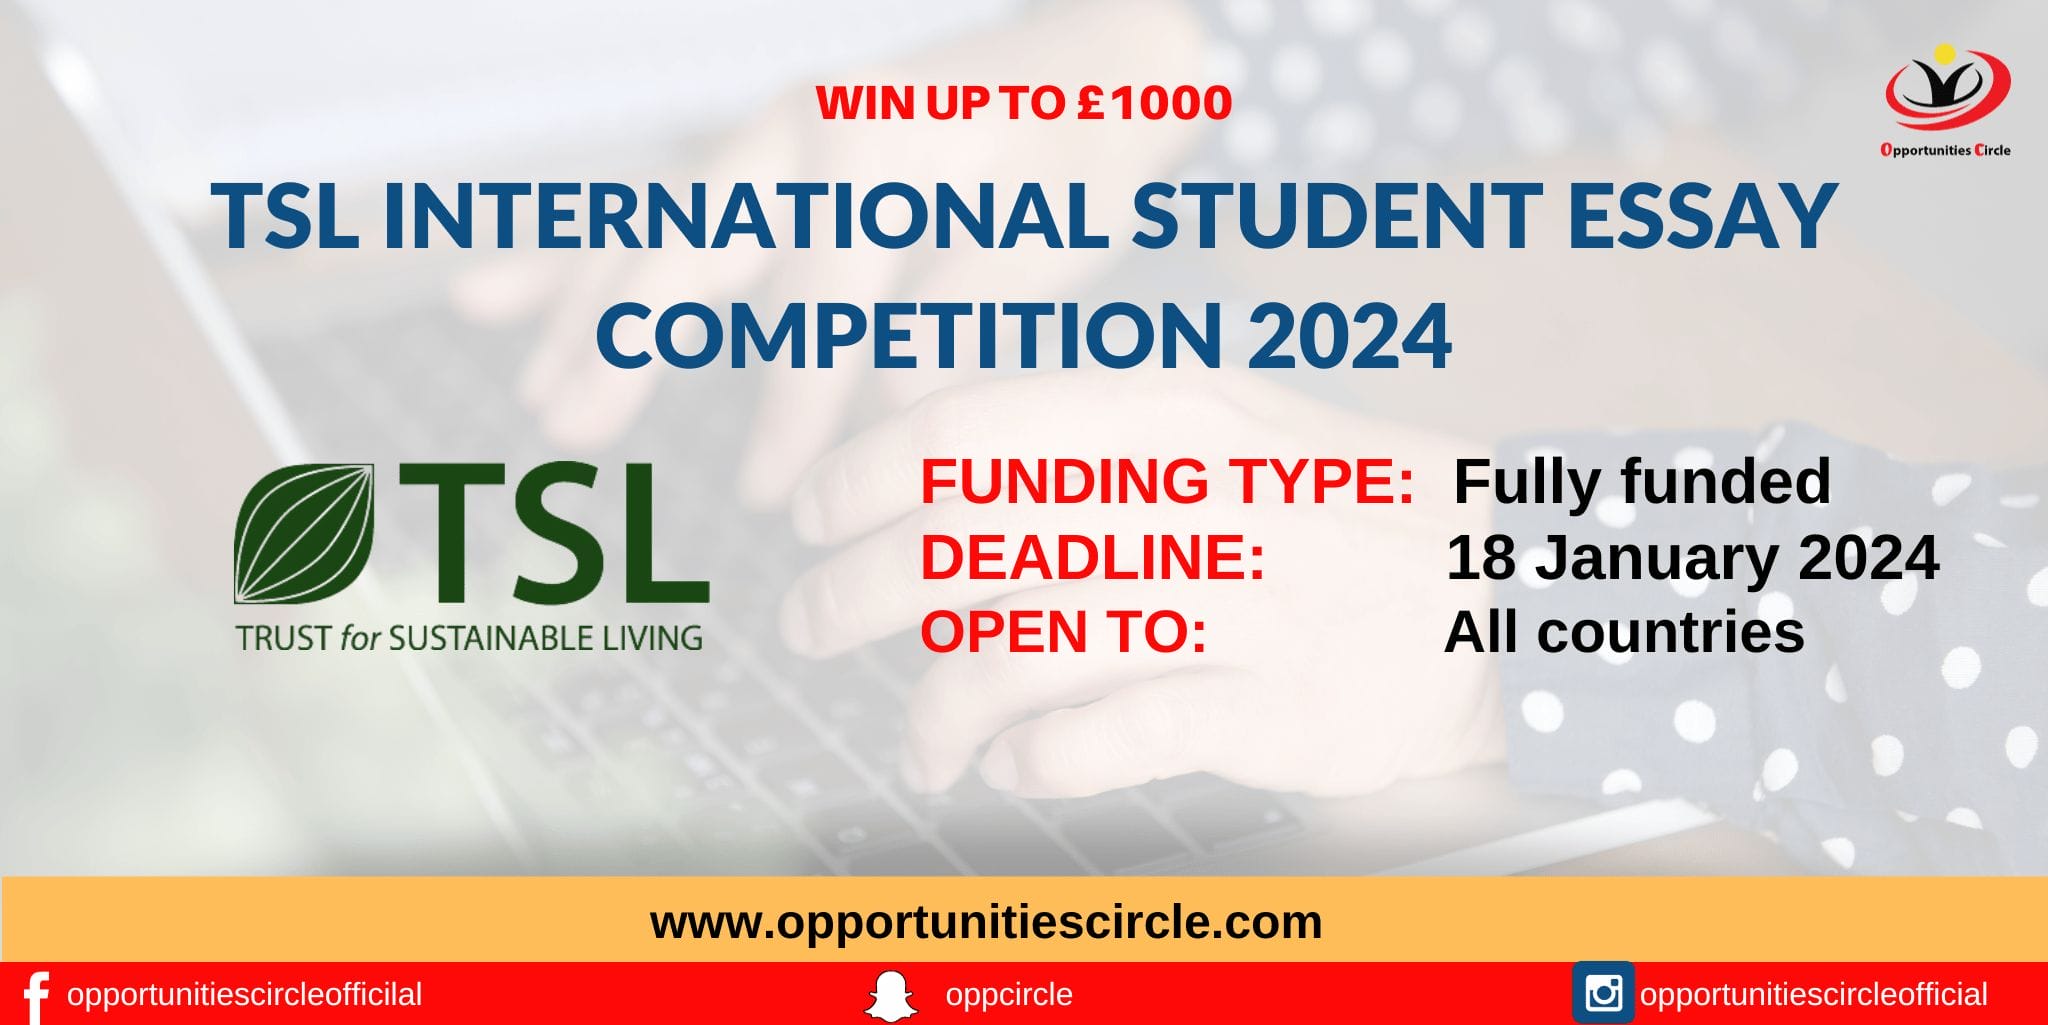 TSL International Student Essay Competition 2024 Win up to £1000